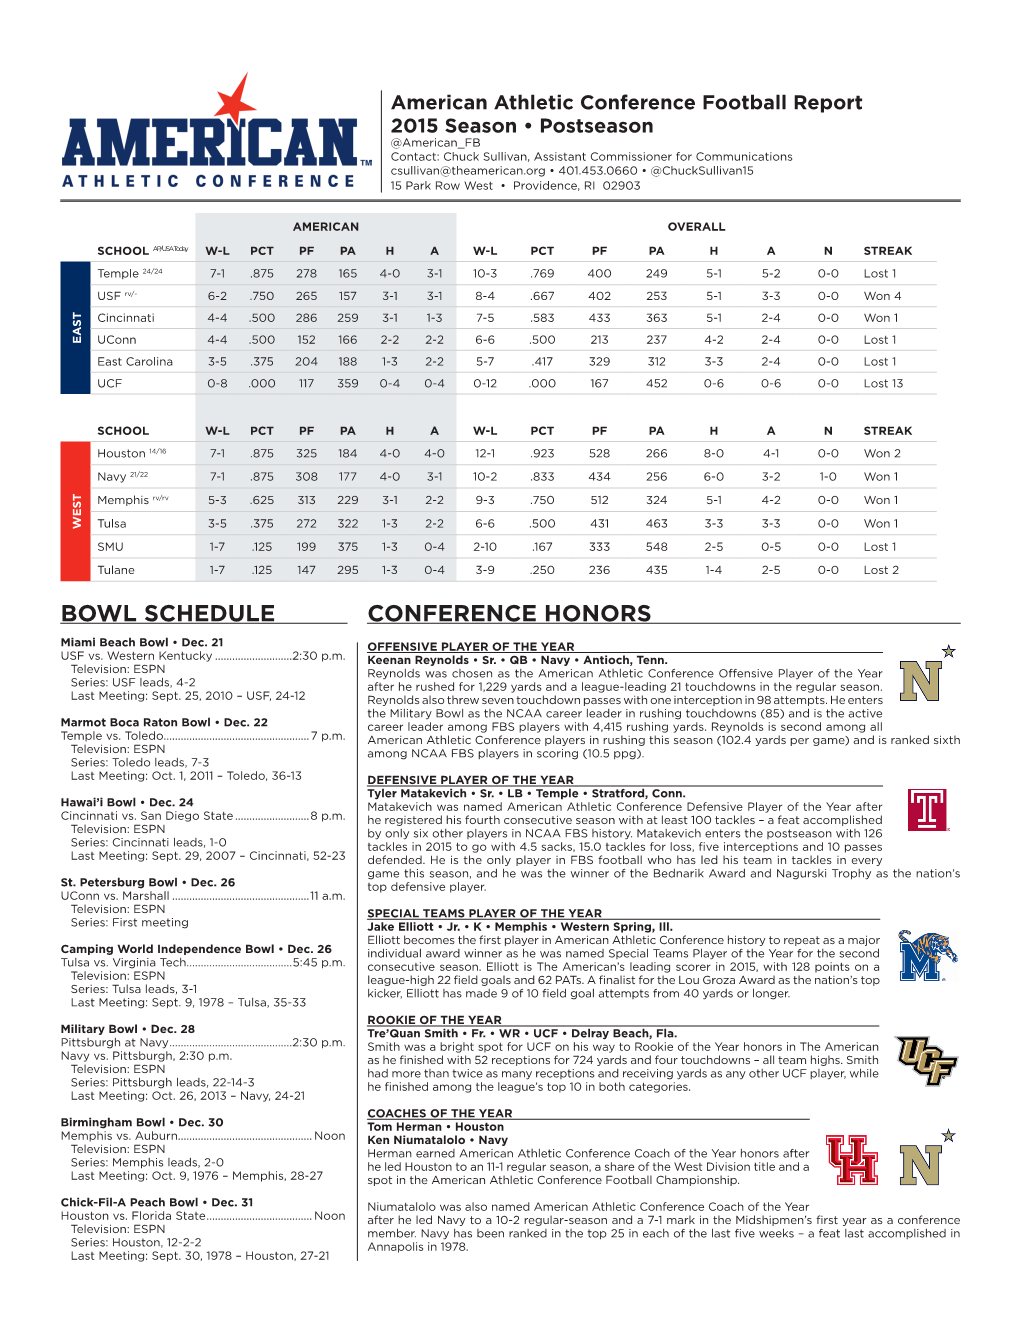 Conference Honors Bowl Schedule